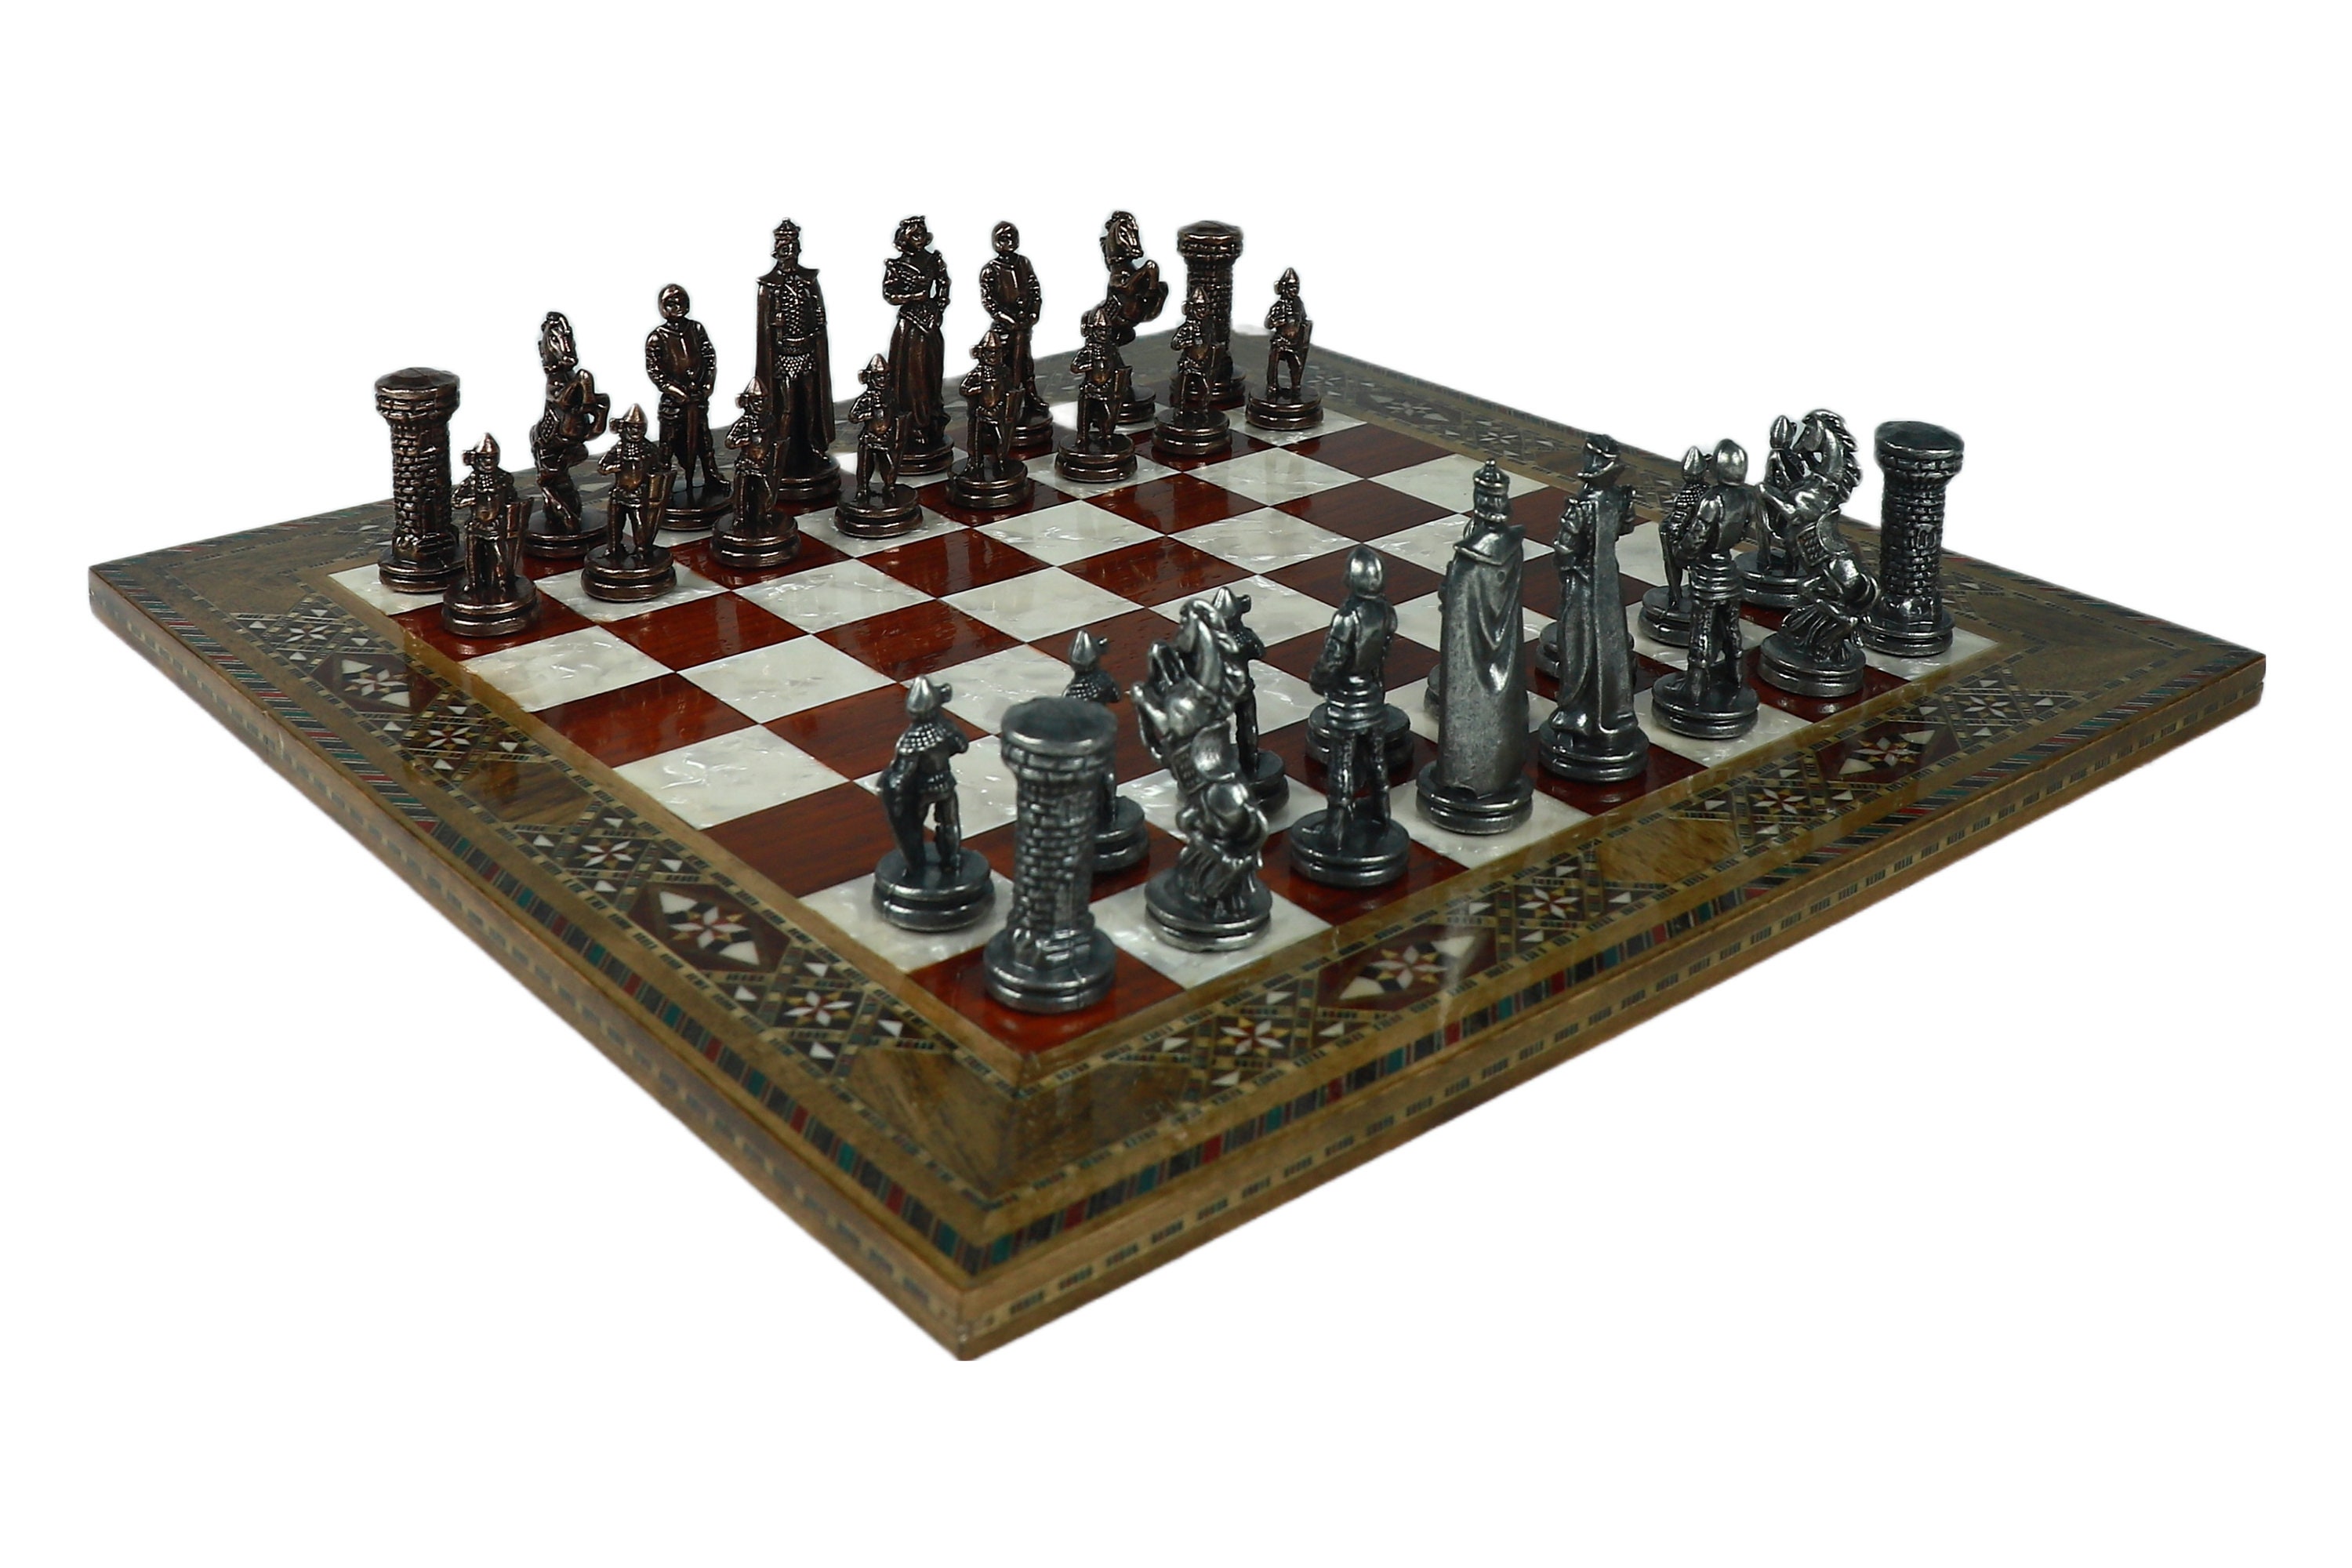 Chess and games shop Muba Handmade Chess Set Mosaic Art 15inch - Wooden  Chess shess Board with Metal Chess Pieces- Gift Item